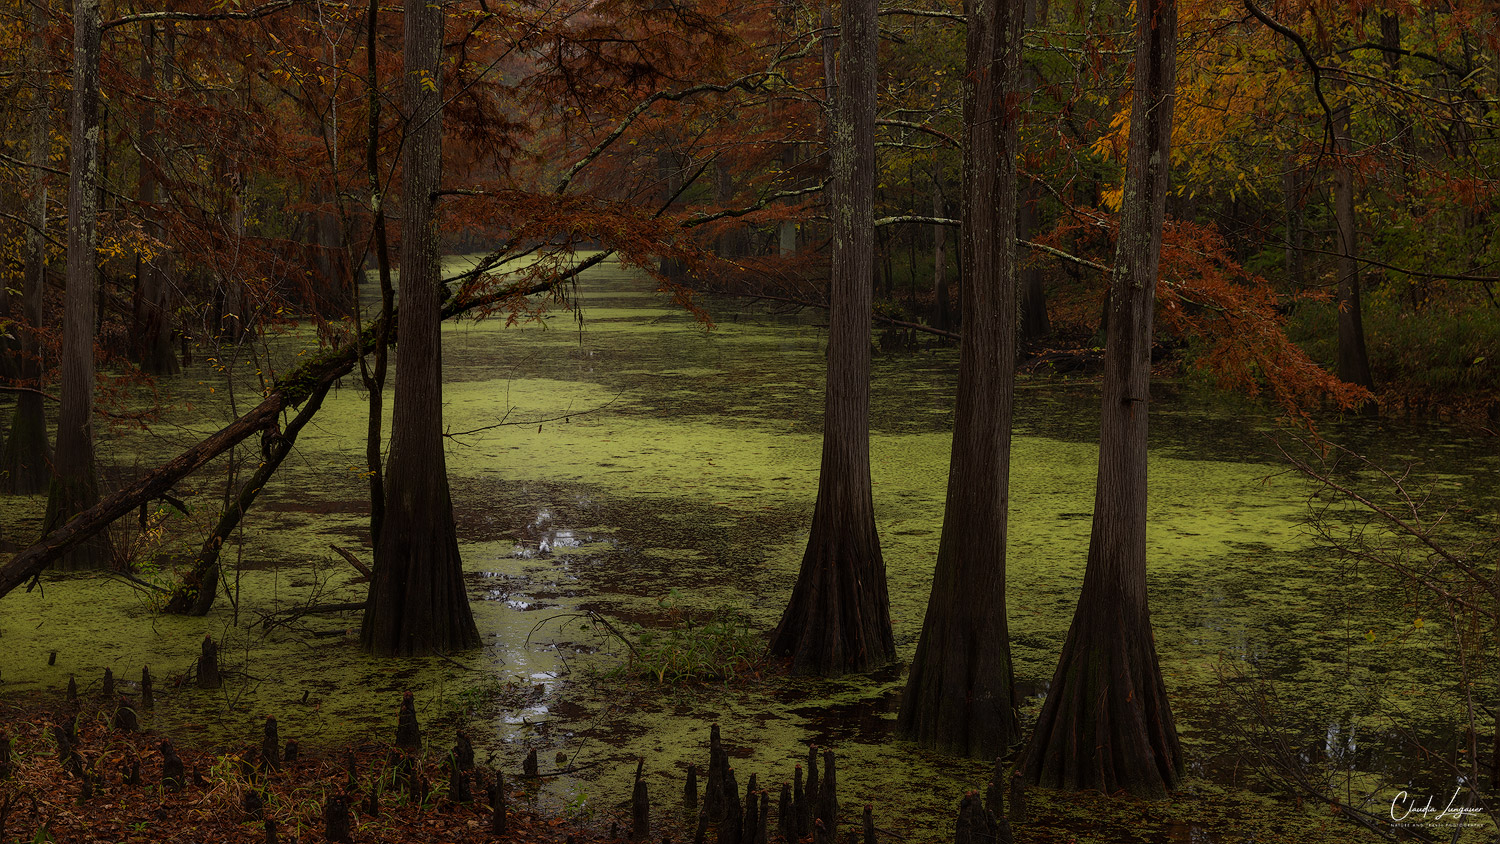 View of swamp river in North Louisiana.